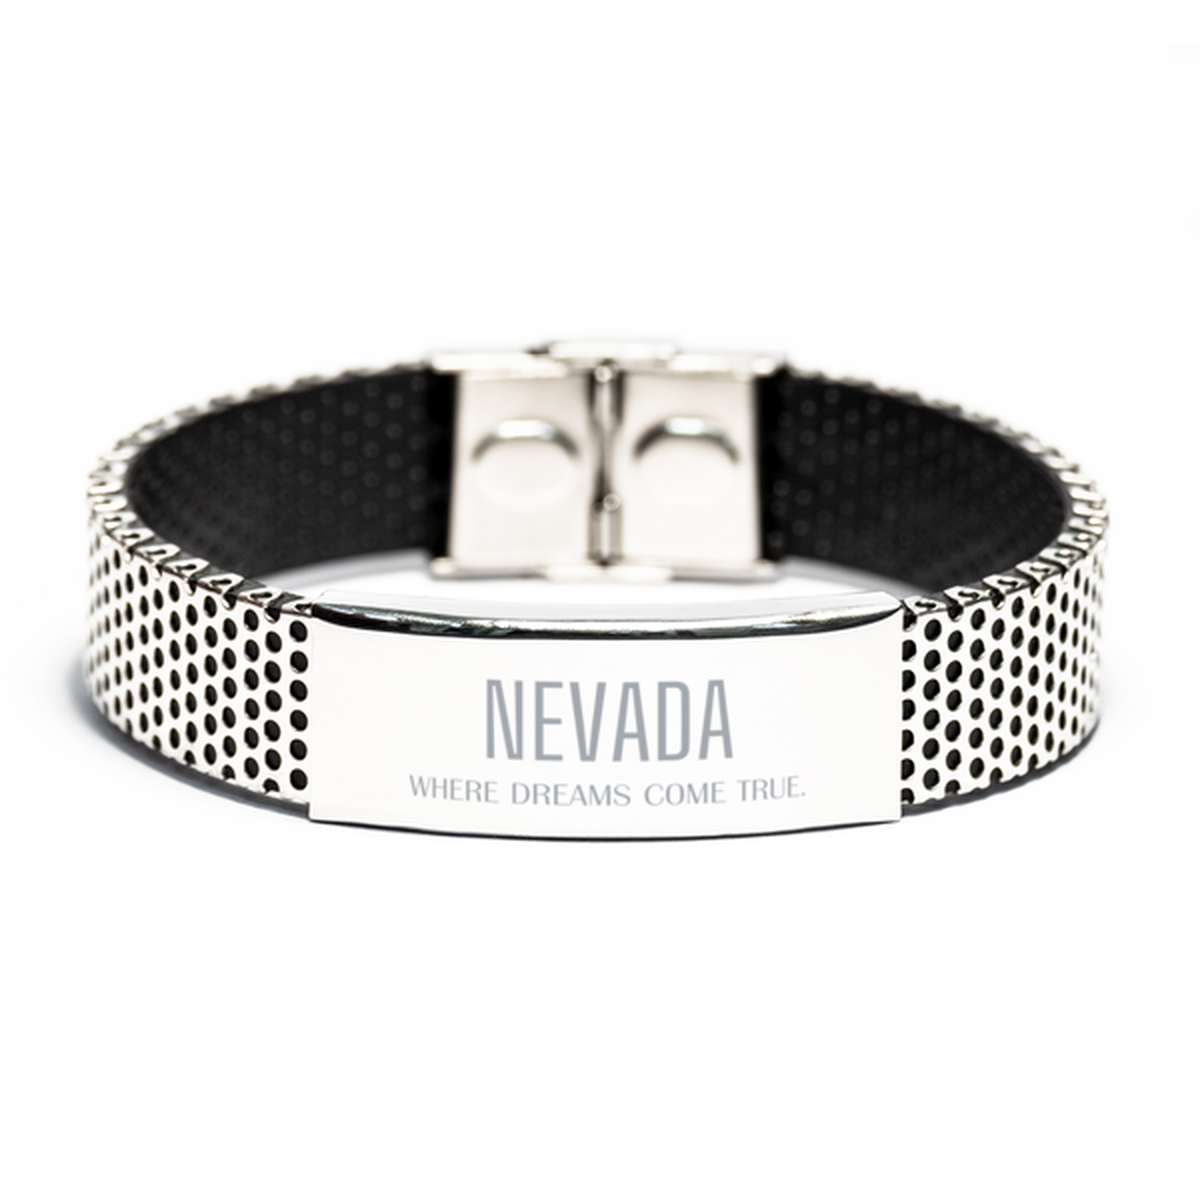 Love Nevada State Stainless Steel Bracelet, Nevada Where dreams come true, Birthday Inspirational Gifts For Nevada Men, Women, Friends